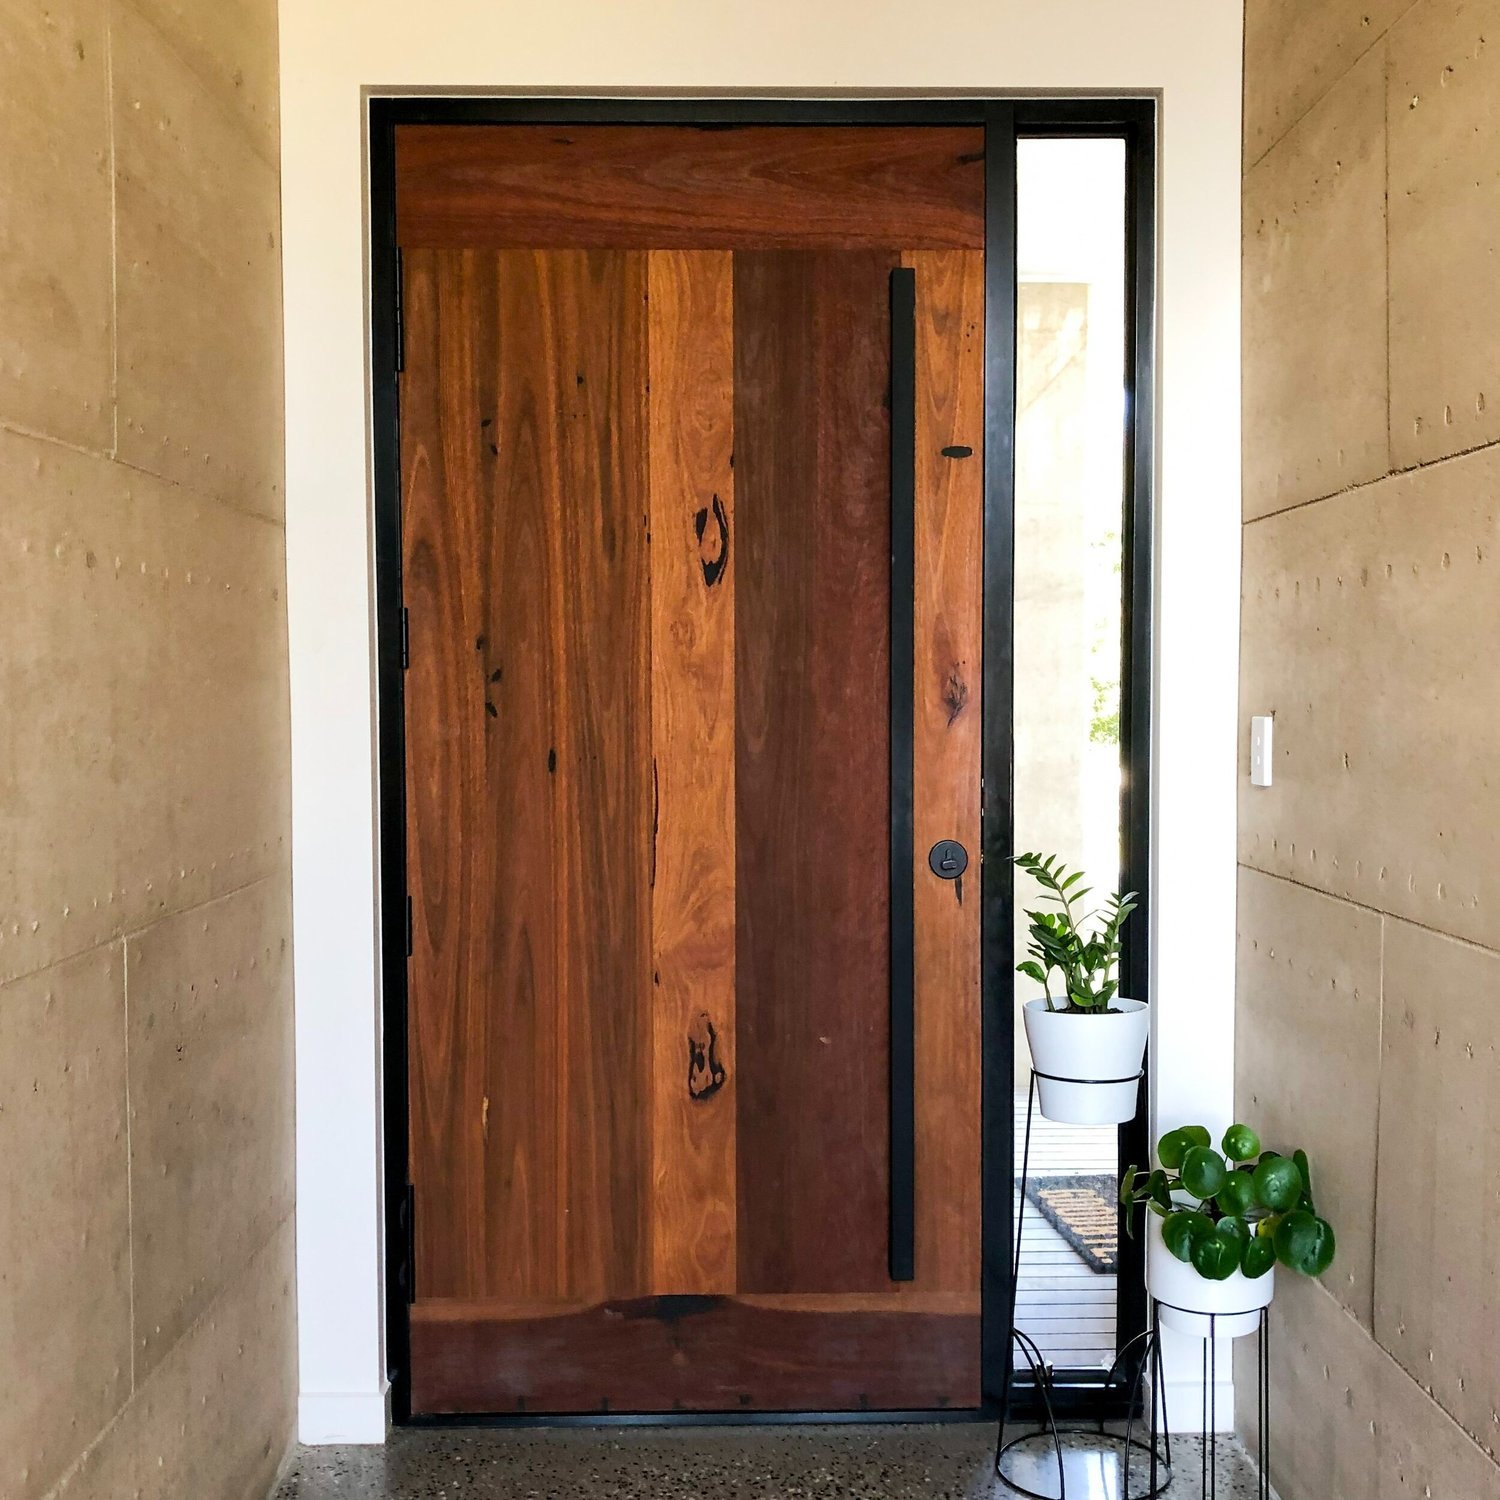 Timber door created from red gum timber